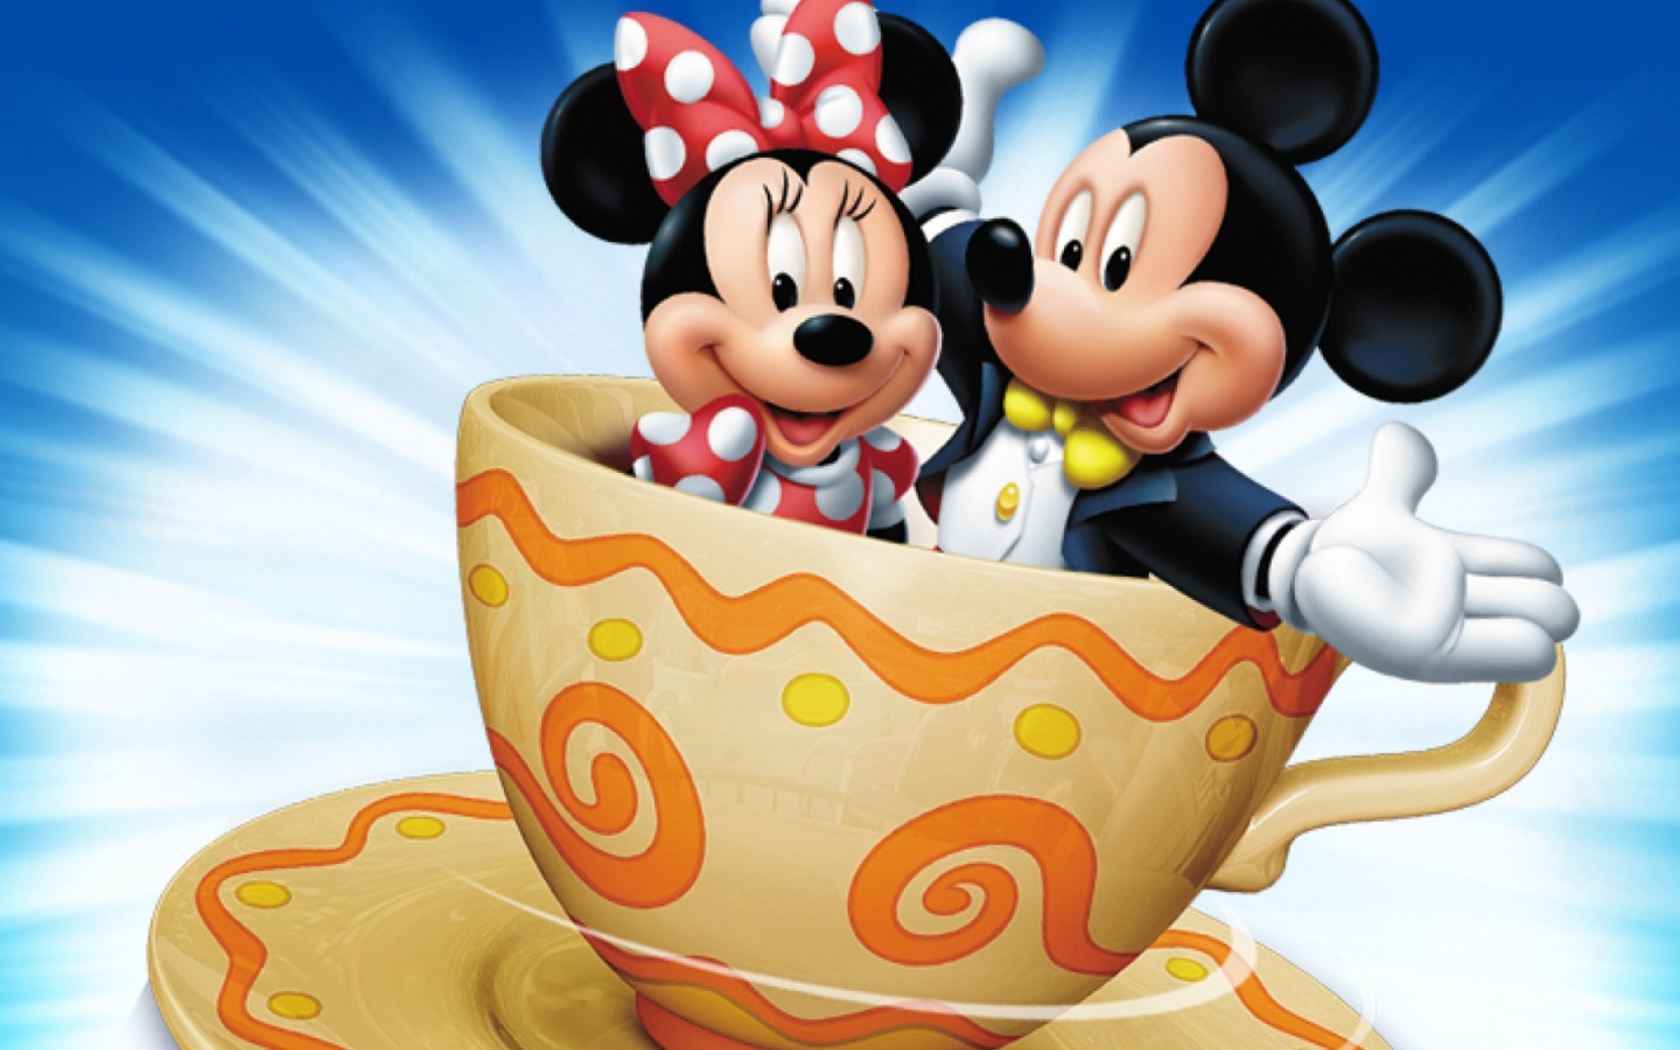 Mickey And Minnie Mouse In Cup wallpaper 1680x1050